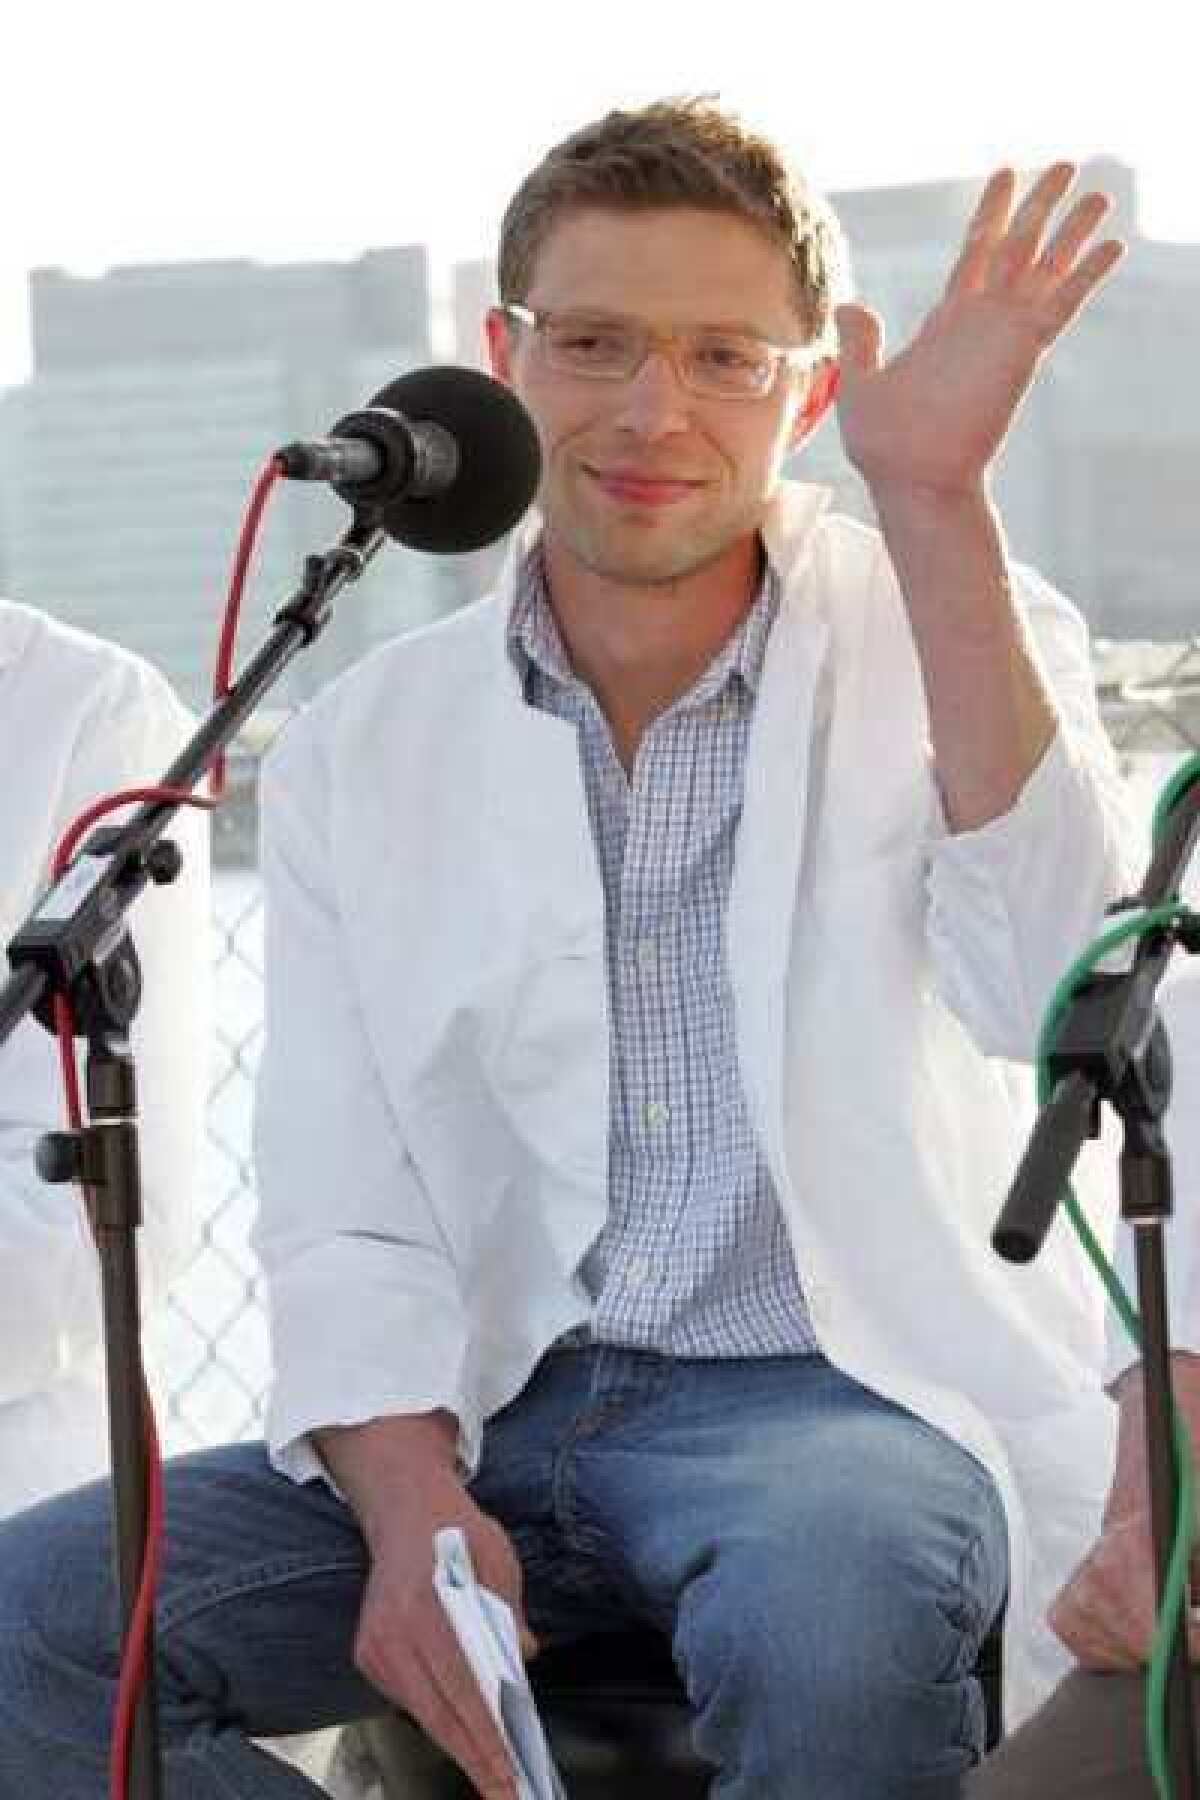 Science writer Jonah Lehrer is seen at the "You and Your Irrational Brain" panel discussion in Long Island City in 2008.